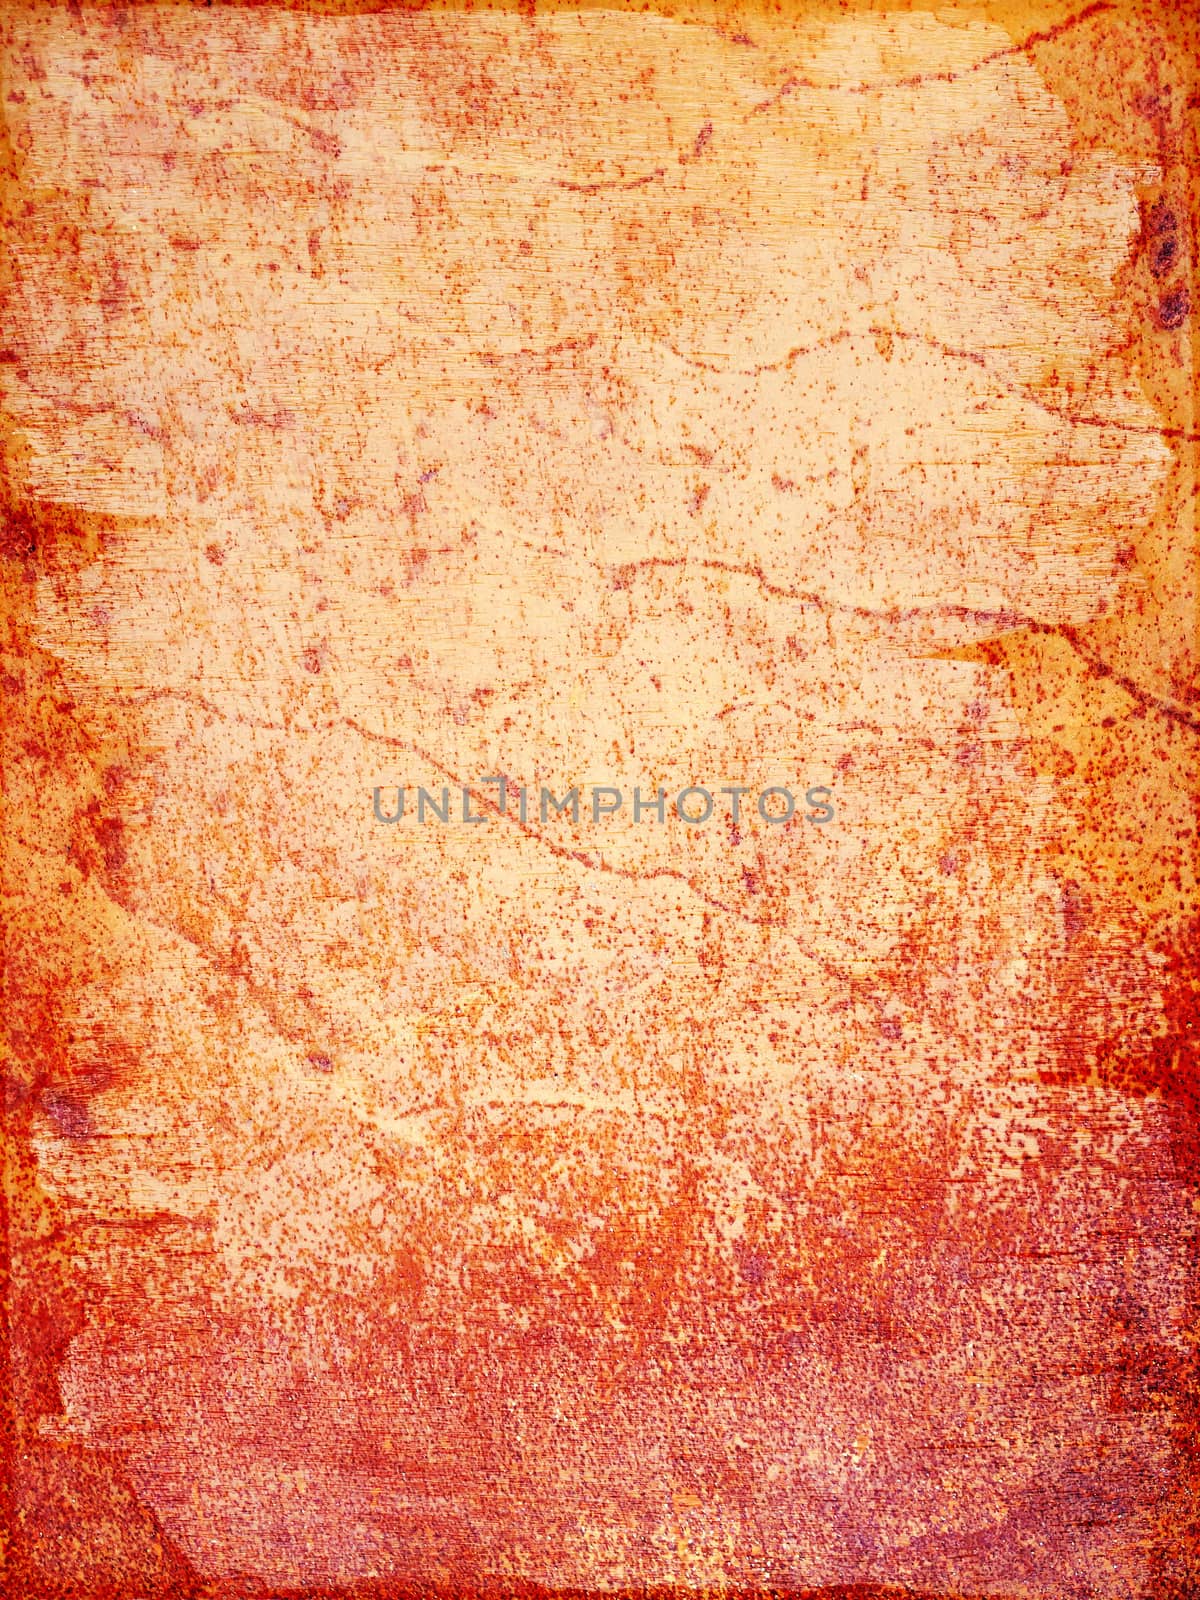 Red and orange rusty metal texture. Grunge background.